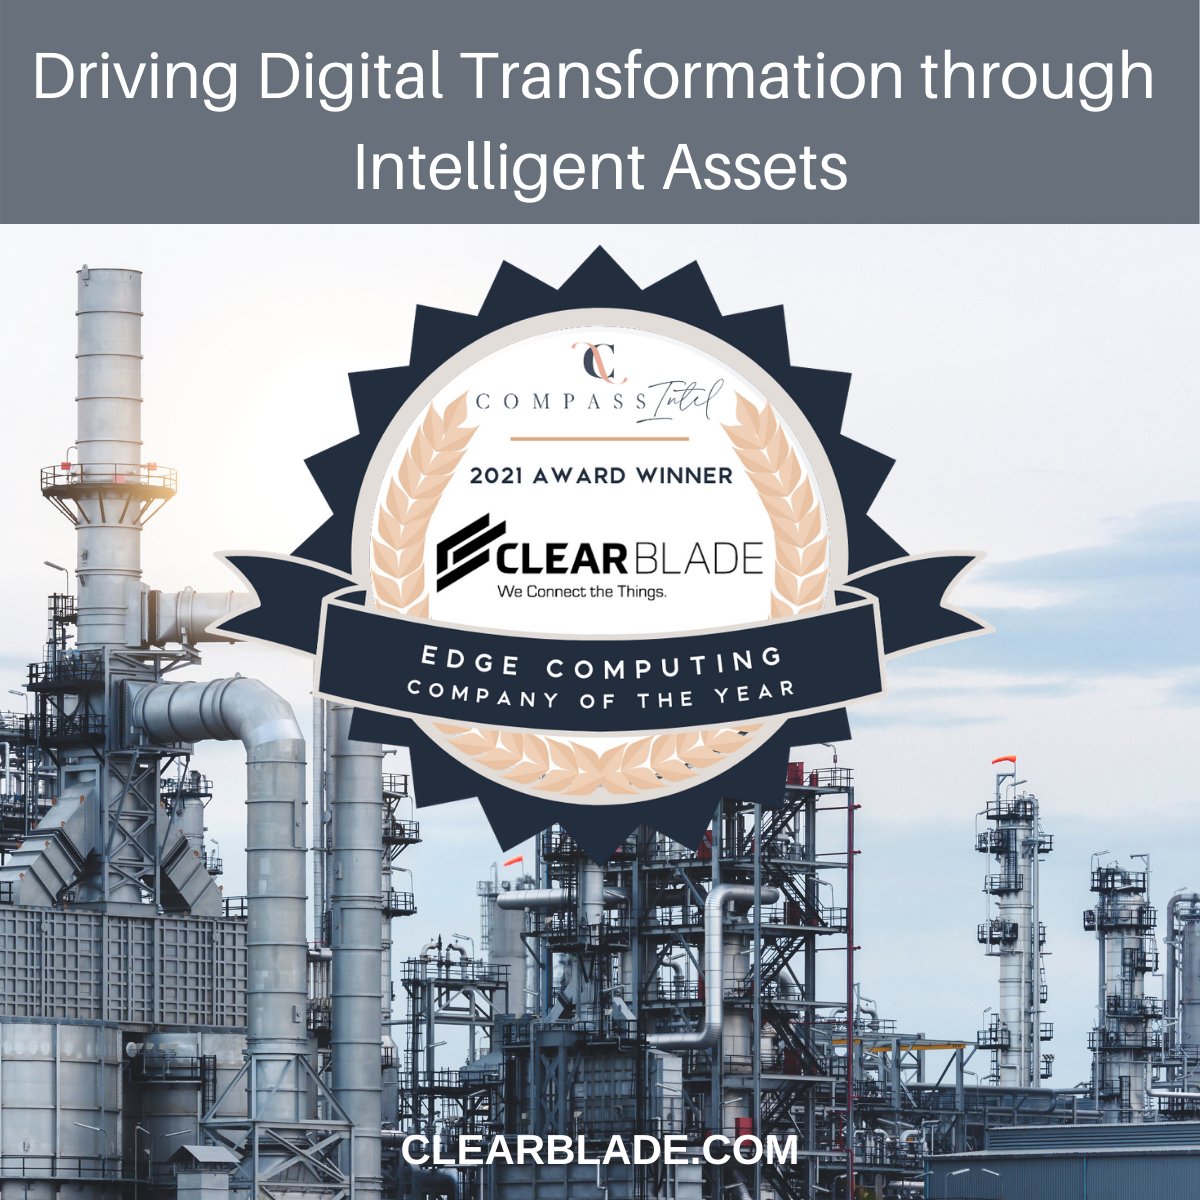 PR '@ClearBlade Wins the 2021 #EdgeComputing Company of the Year Award by @compassintel for the 2nd Year in a Row' compassintelligence.com/press-releases…
#edge #edgeanalytics #dataanalytics #iot #iiot #InternetofThings #industrial #clearblade @AAllsbrook @esimone928 #intelligentassets